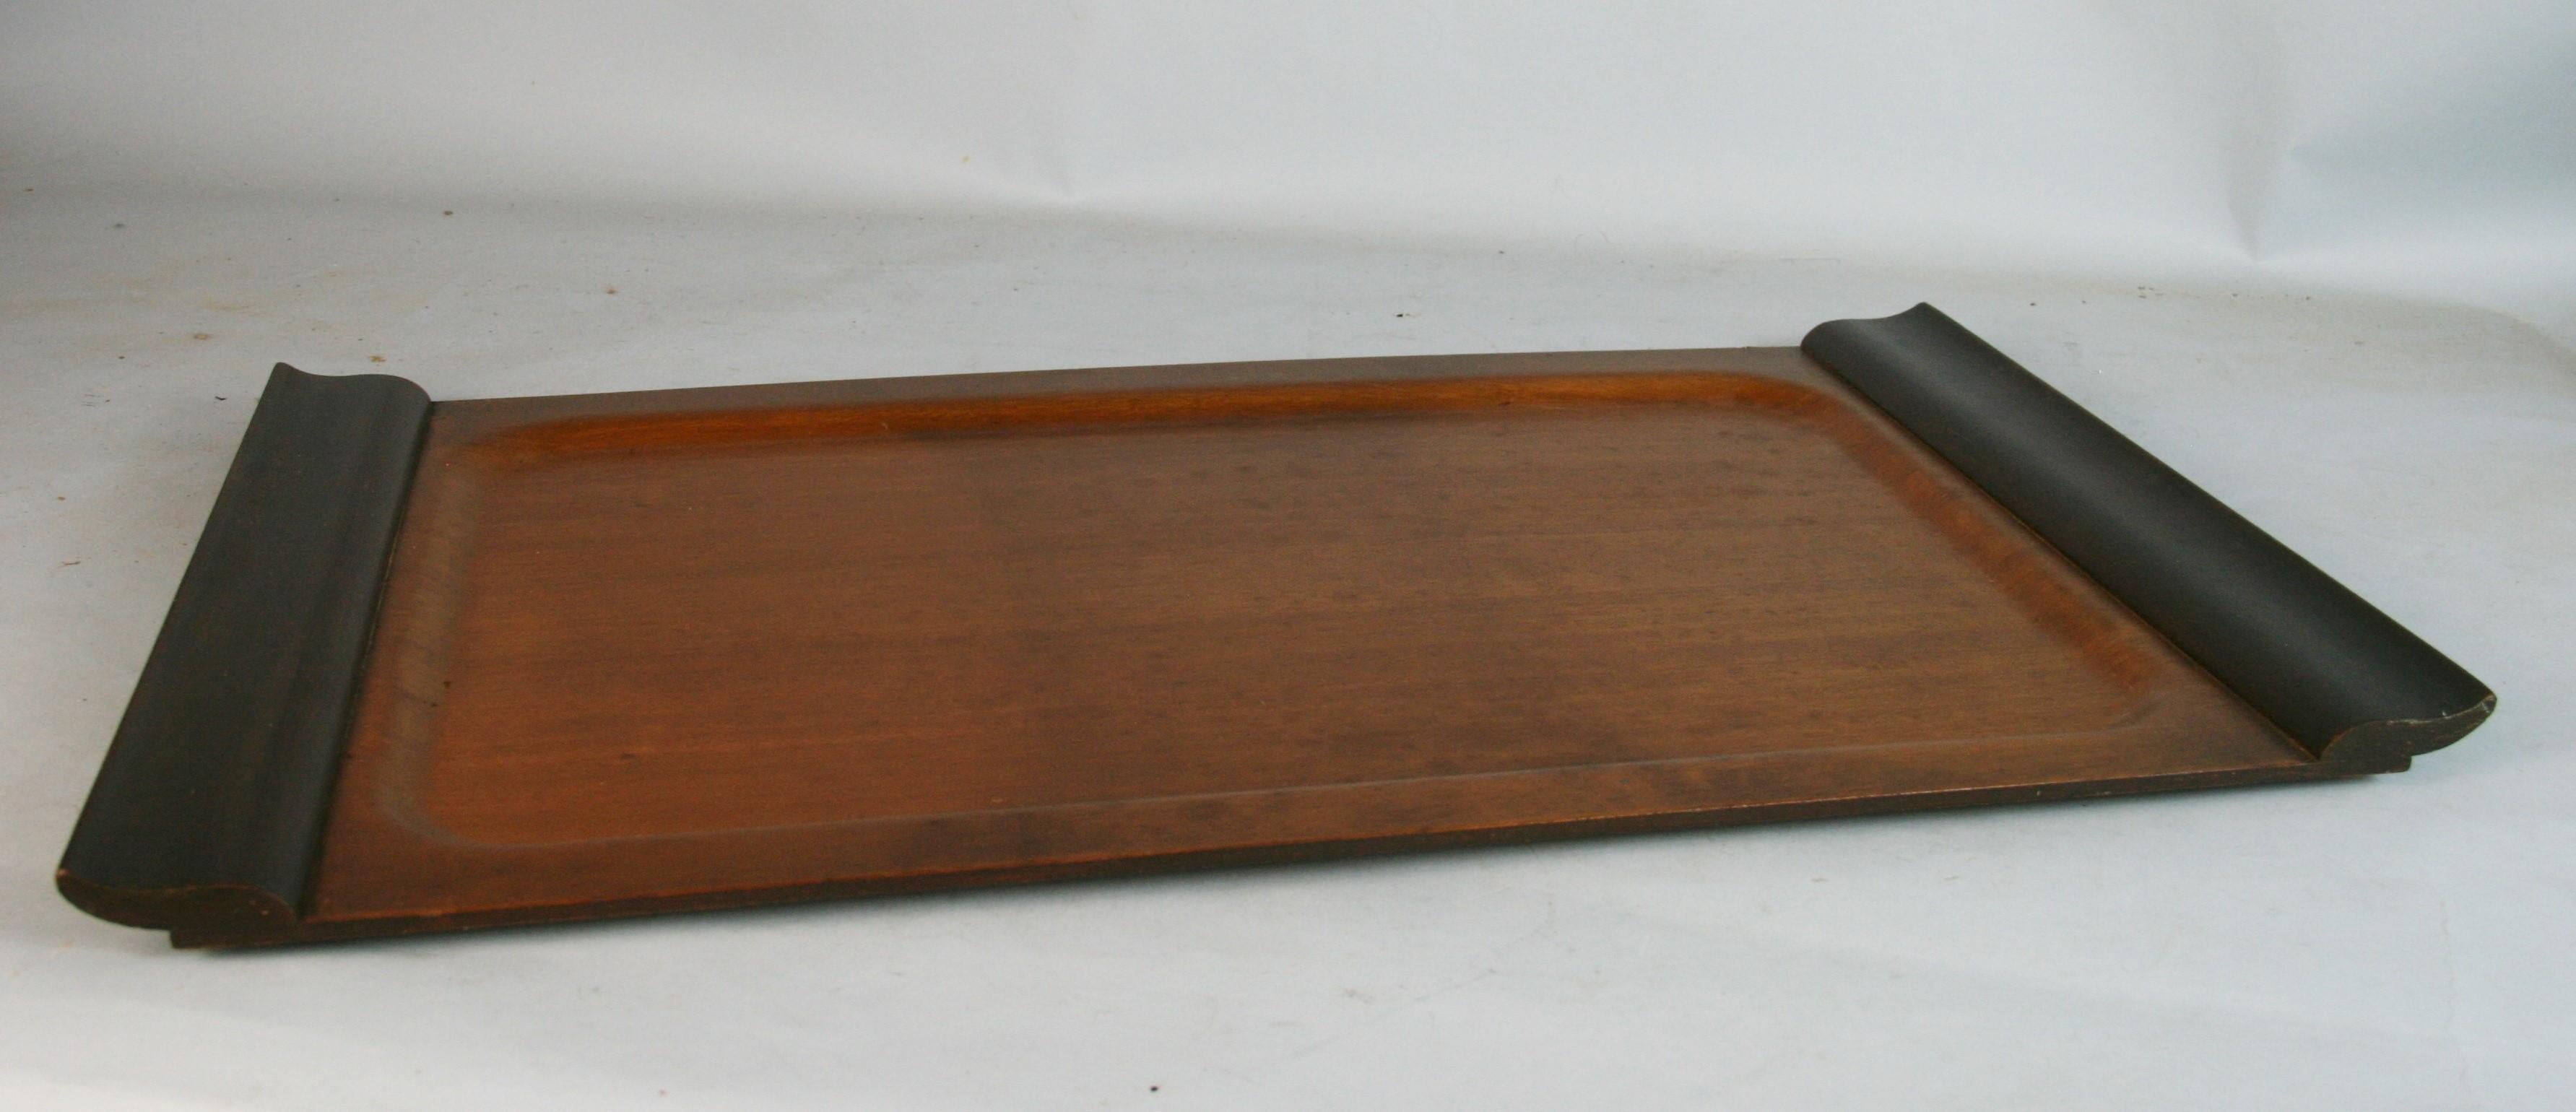 1579 Bent plywood serving tray with solid wood handles